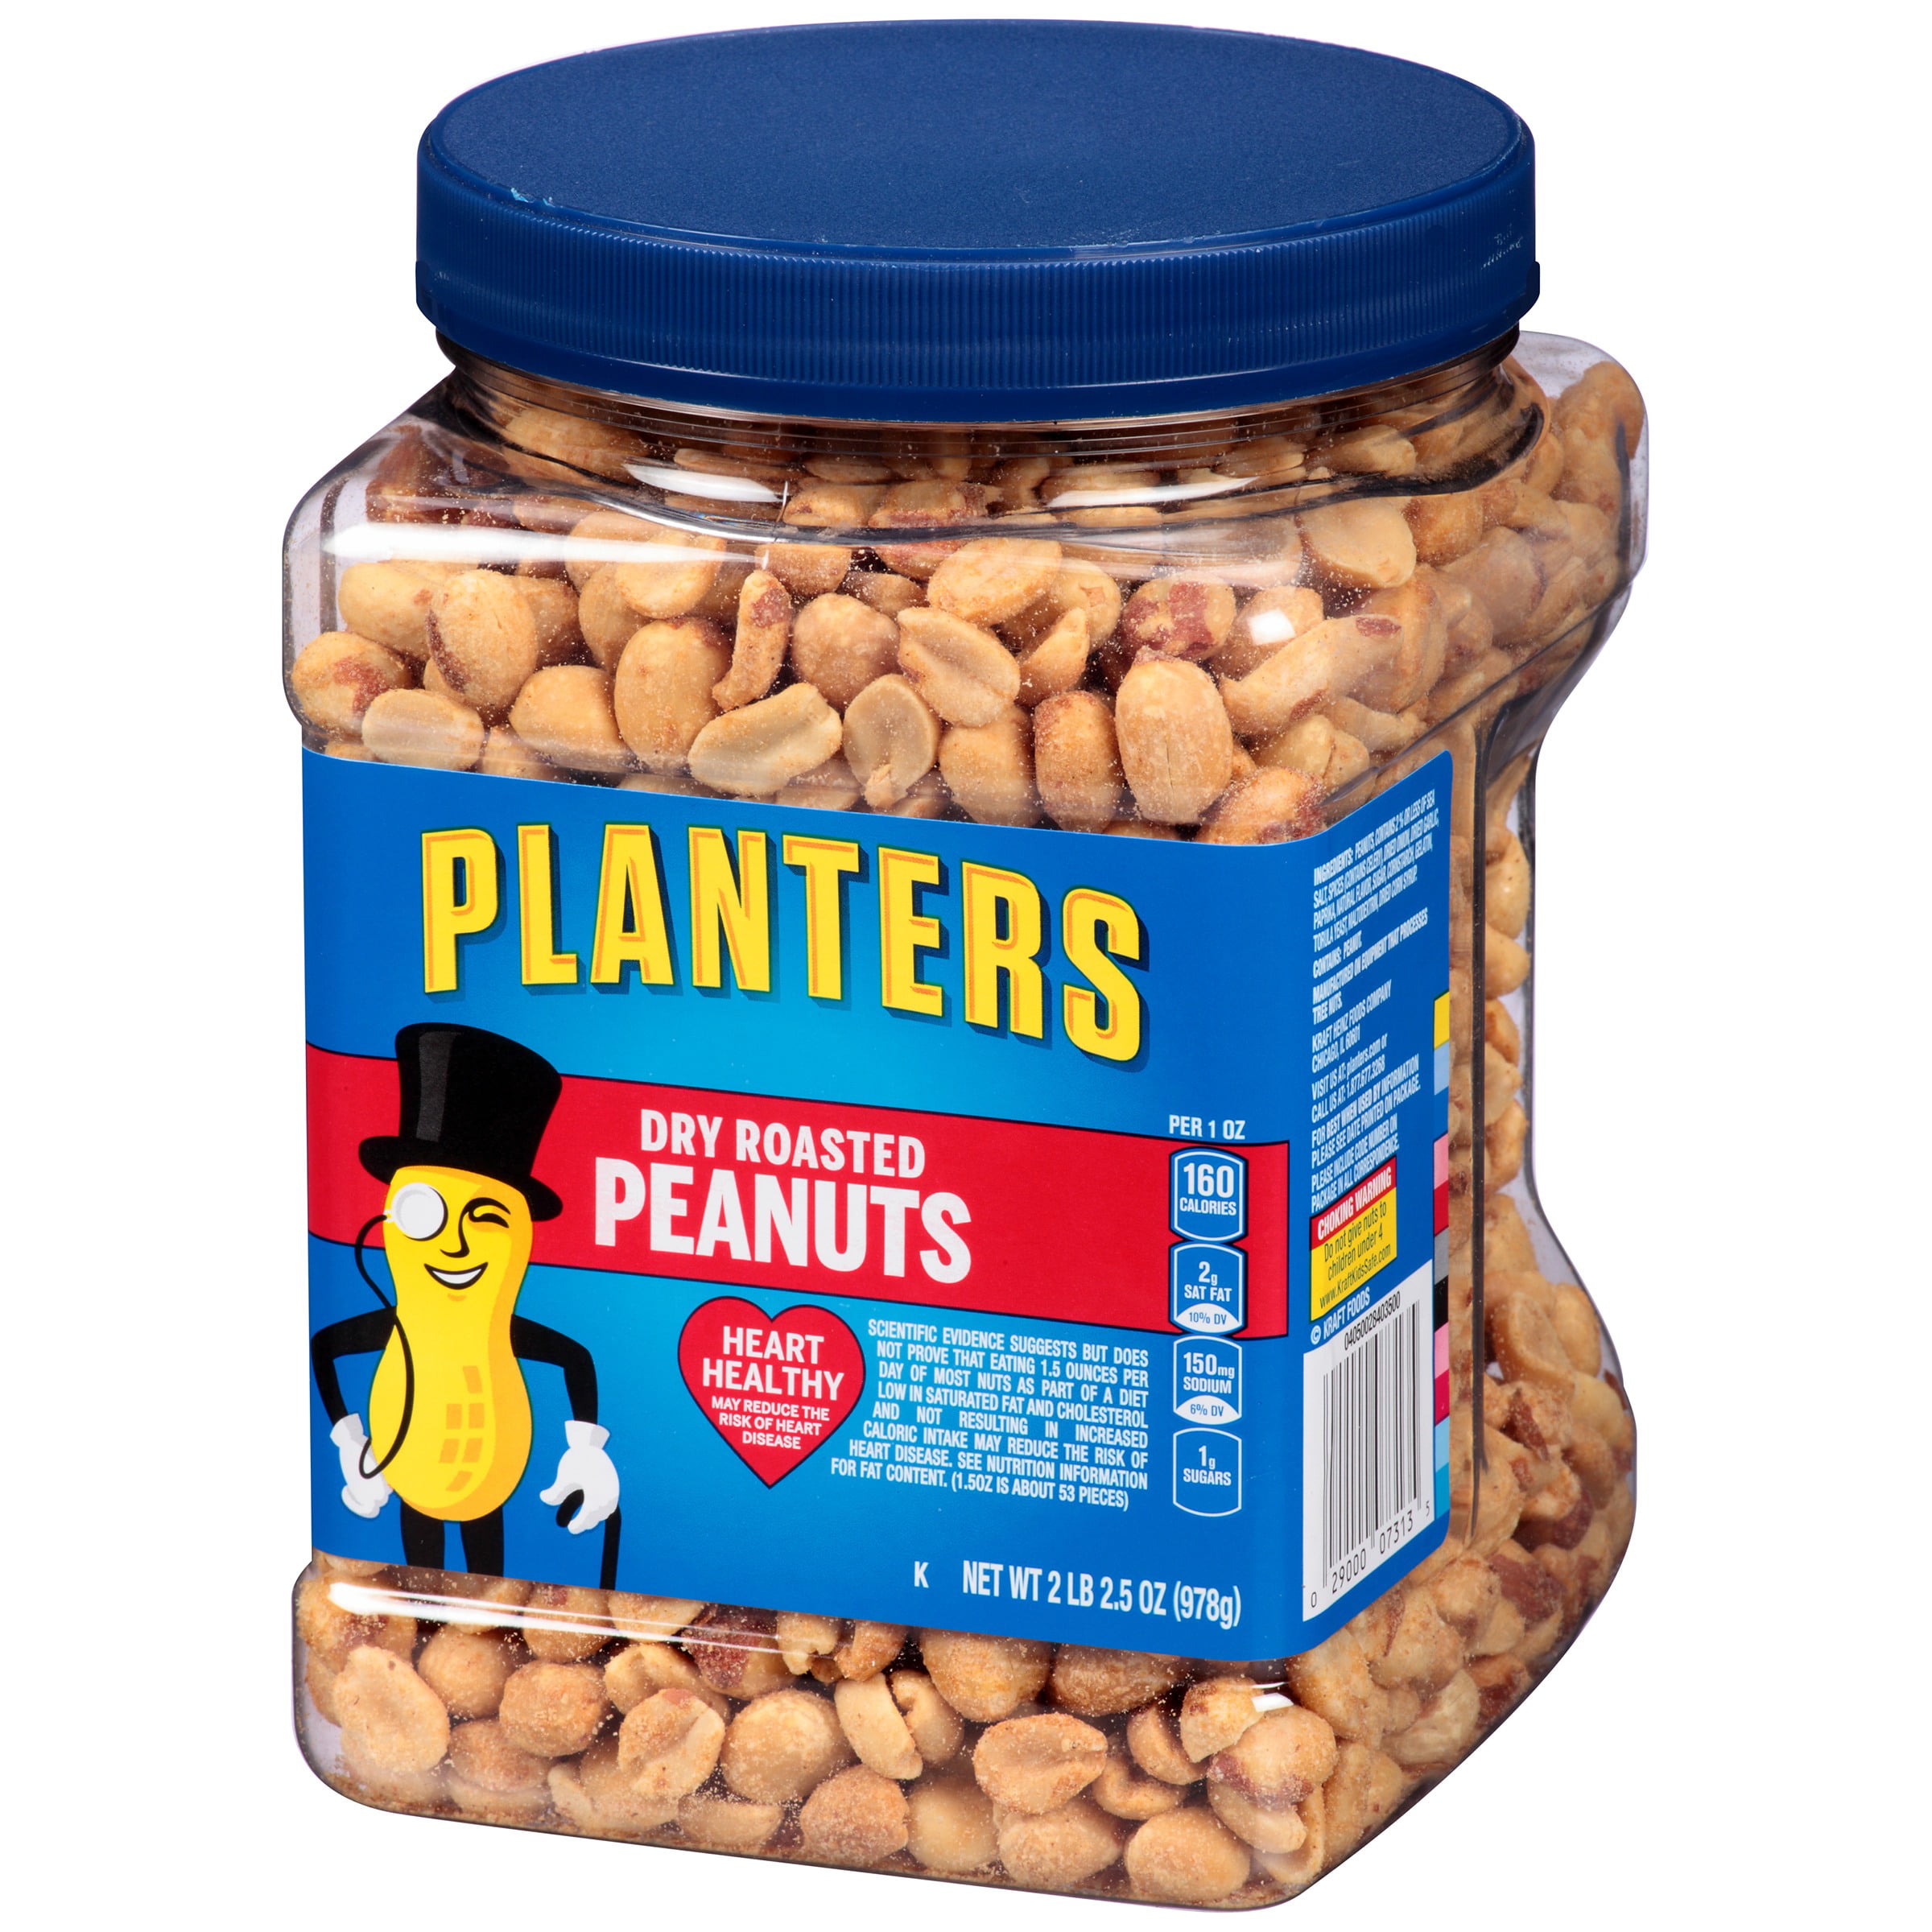 calories in dry roasted peanuts | Diydrywalls.org2400 x 2400